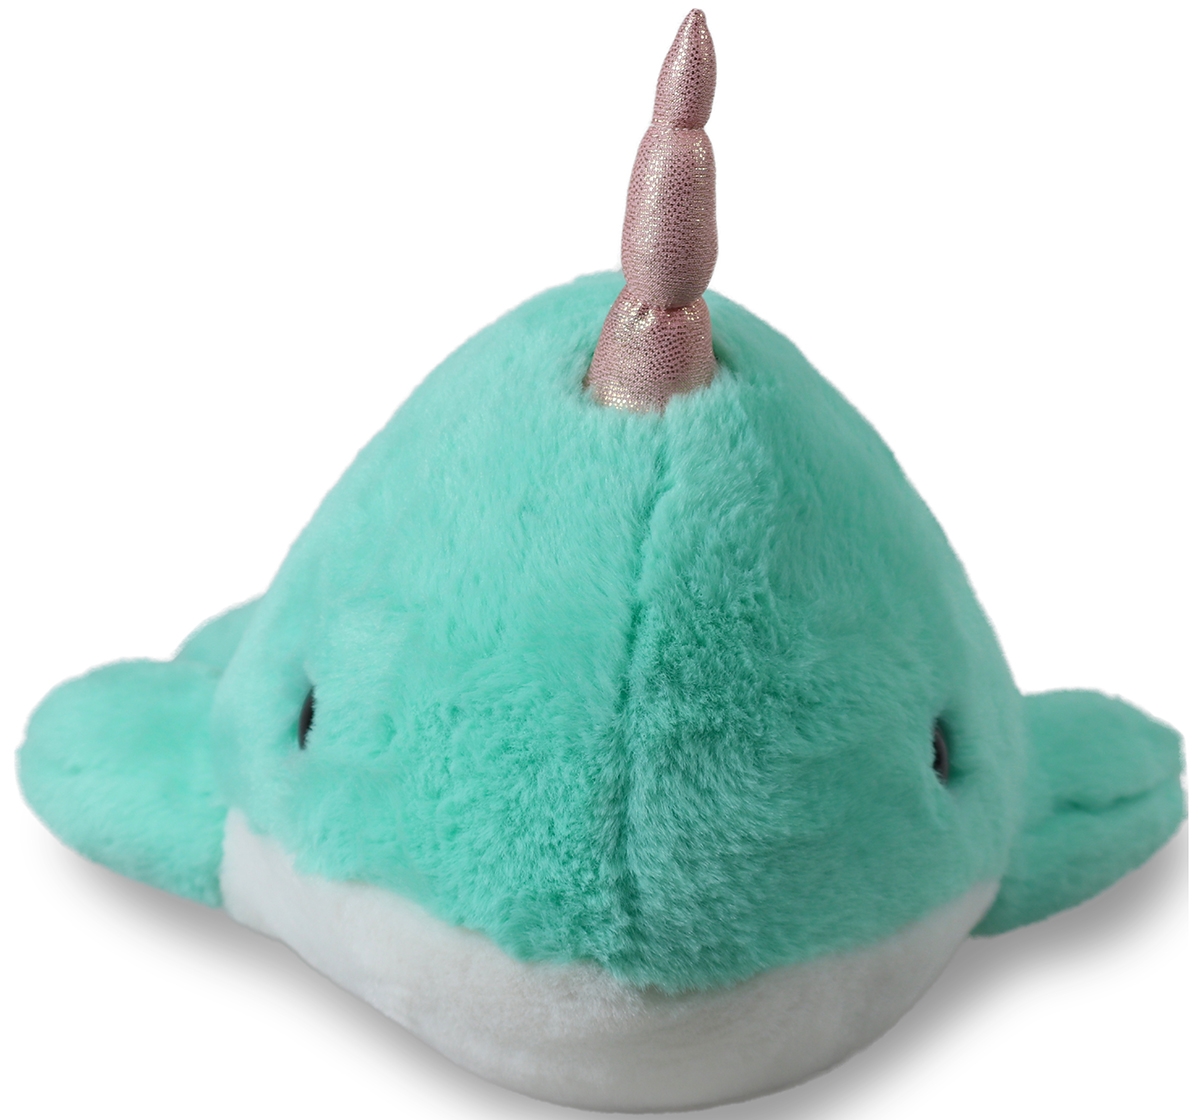 Mirada | Adorable Stuffed Plush Narwhal by Mirada, Soft Toys for Kids of All Ages, 3Y+, Green, 40cm 3